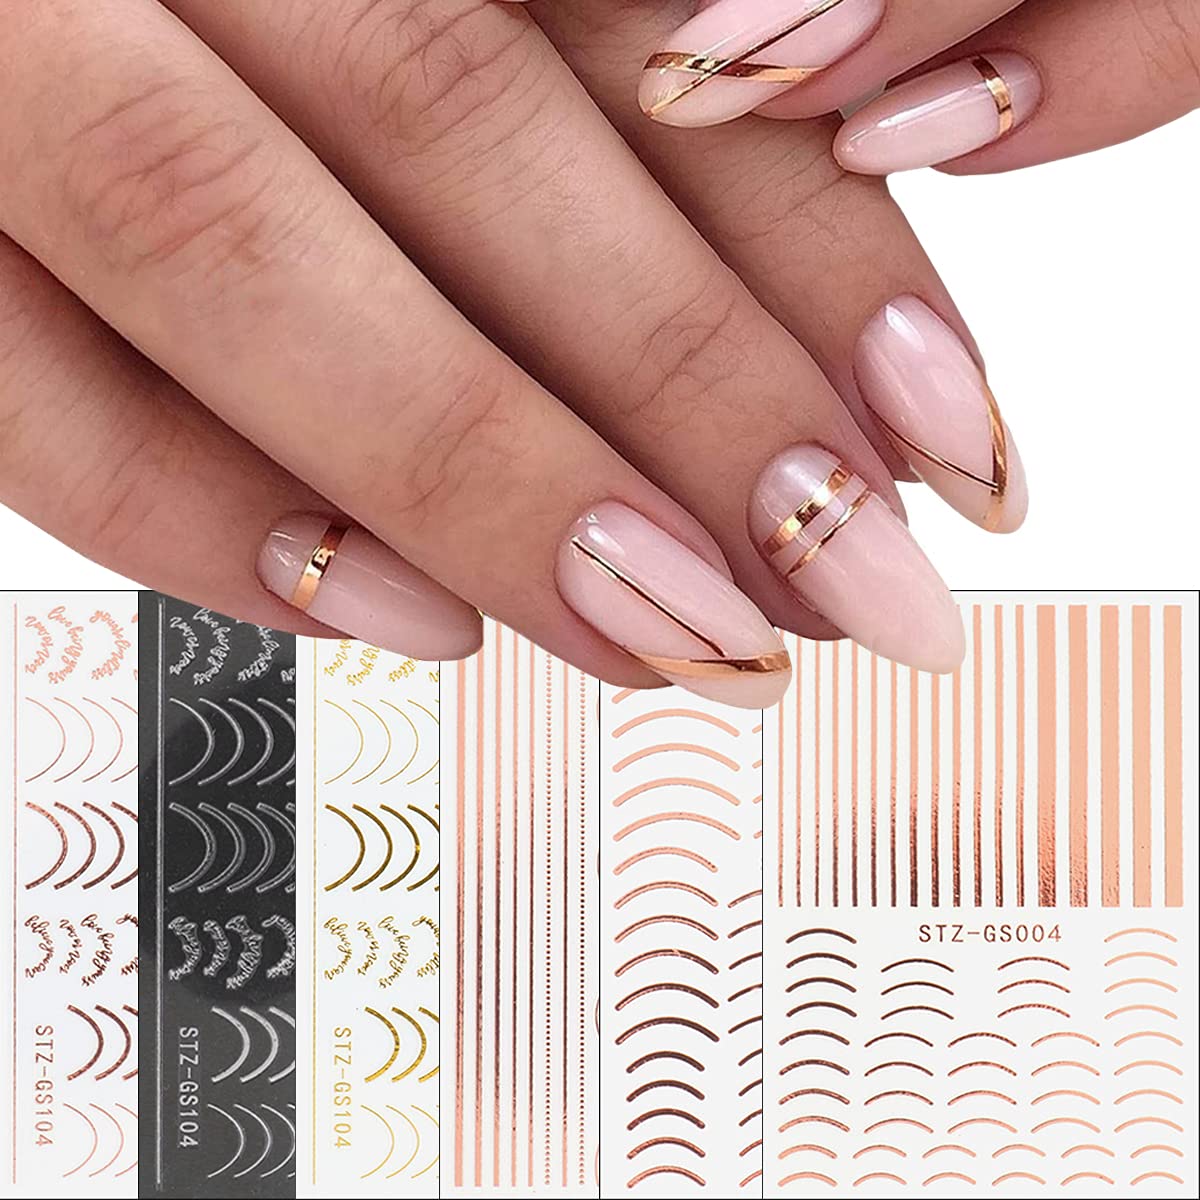 Golden Decorated Nail